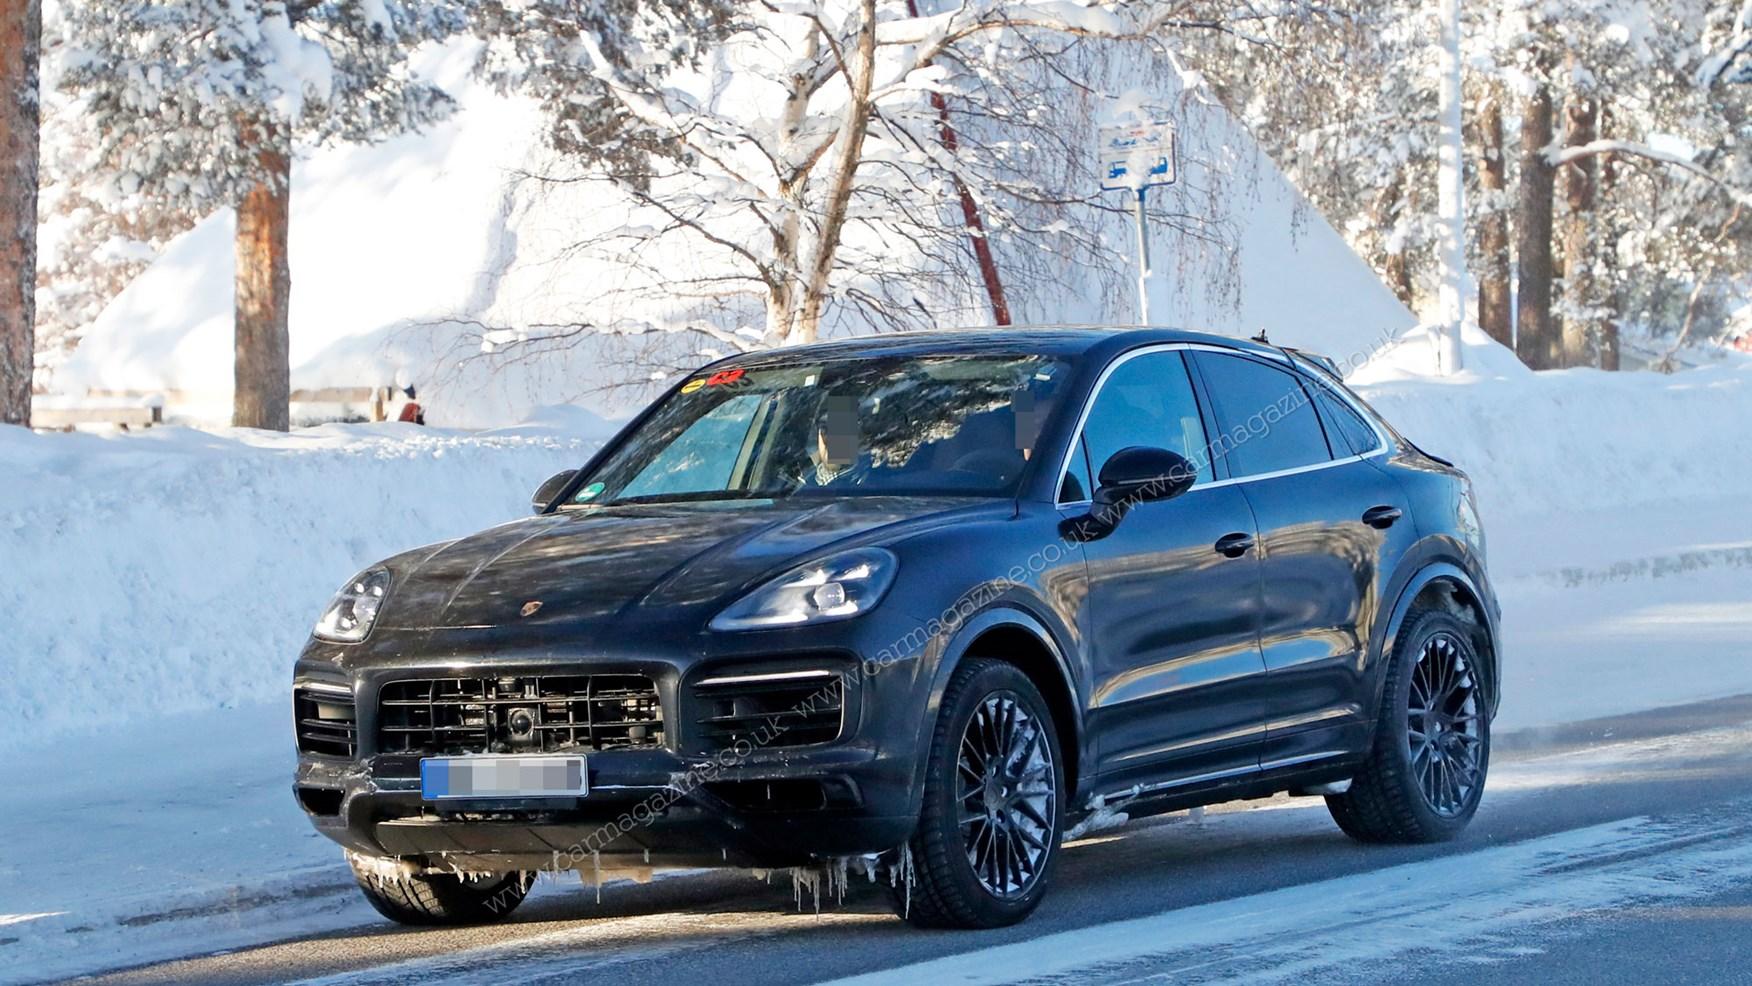 Porsche Cayenne Coupe sporty SUV spotted winter testing